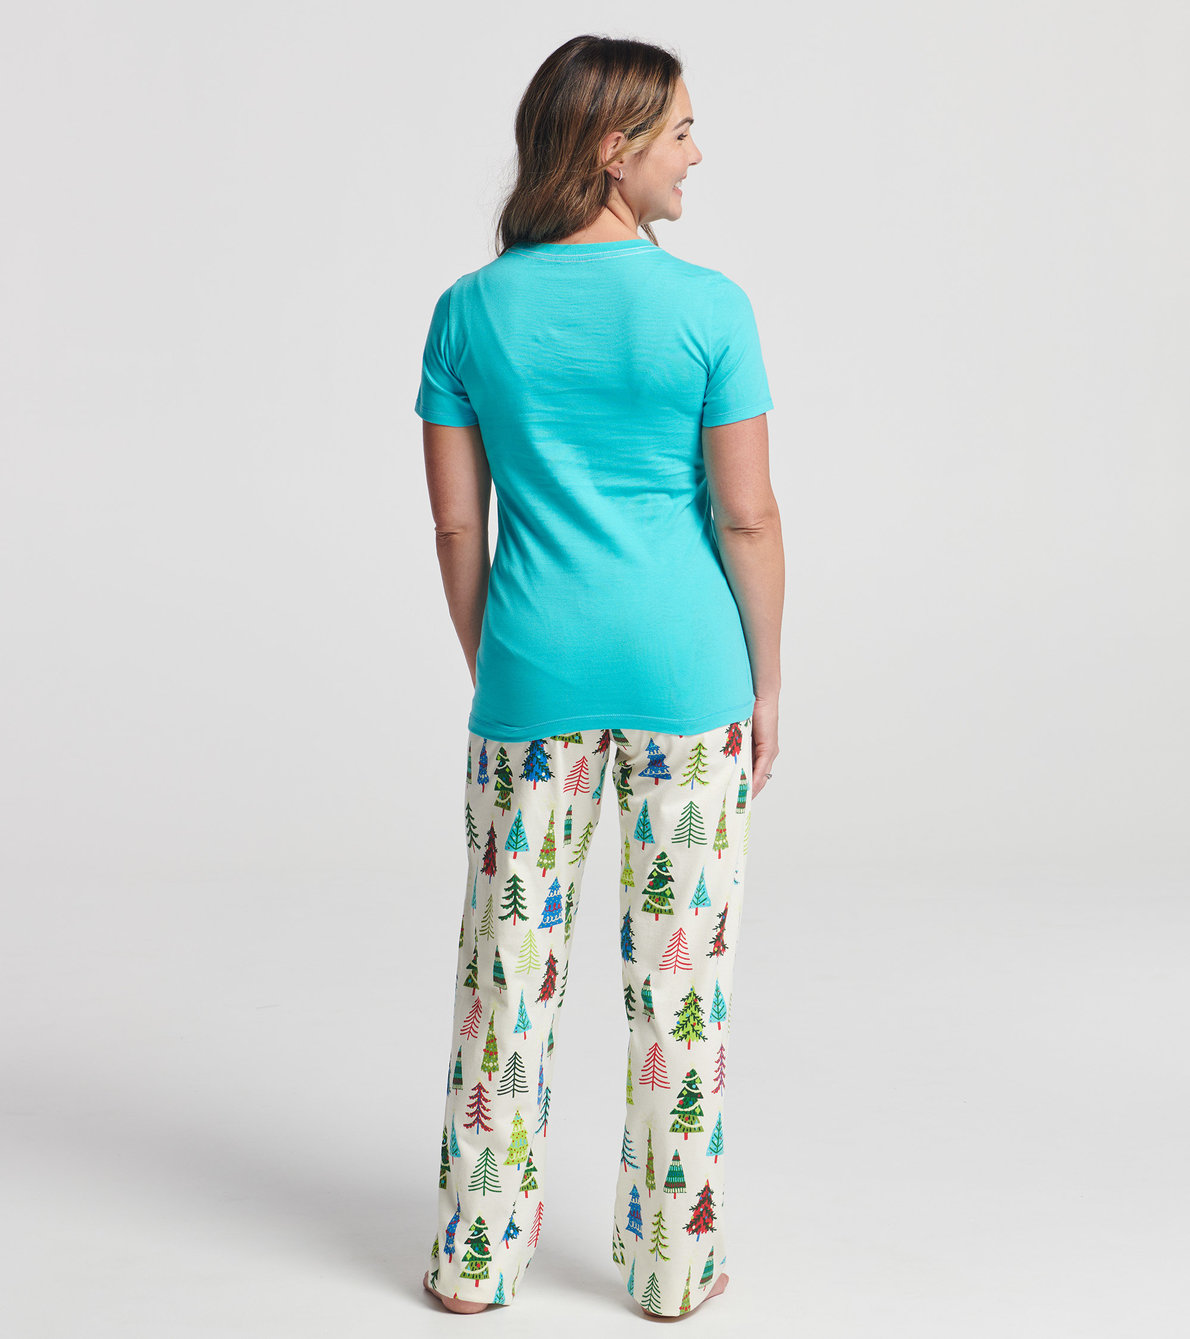 View larger image of Christmas Trees Women's Tee and Pants Pajama Separates